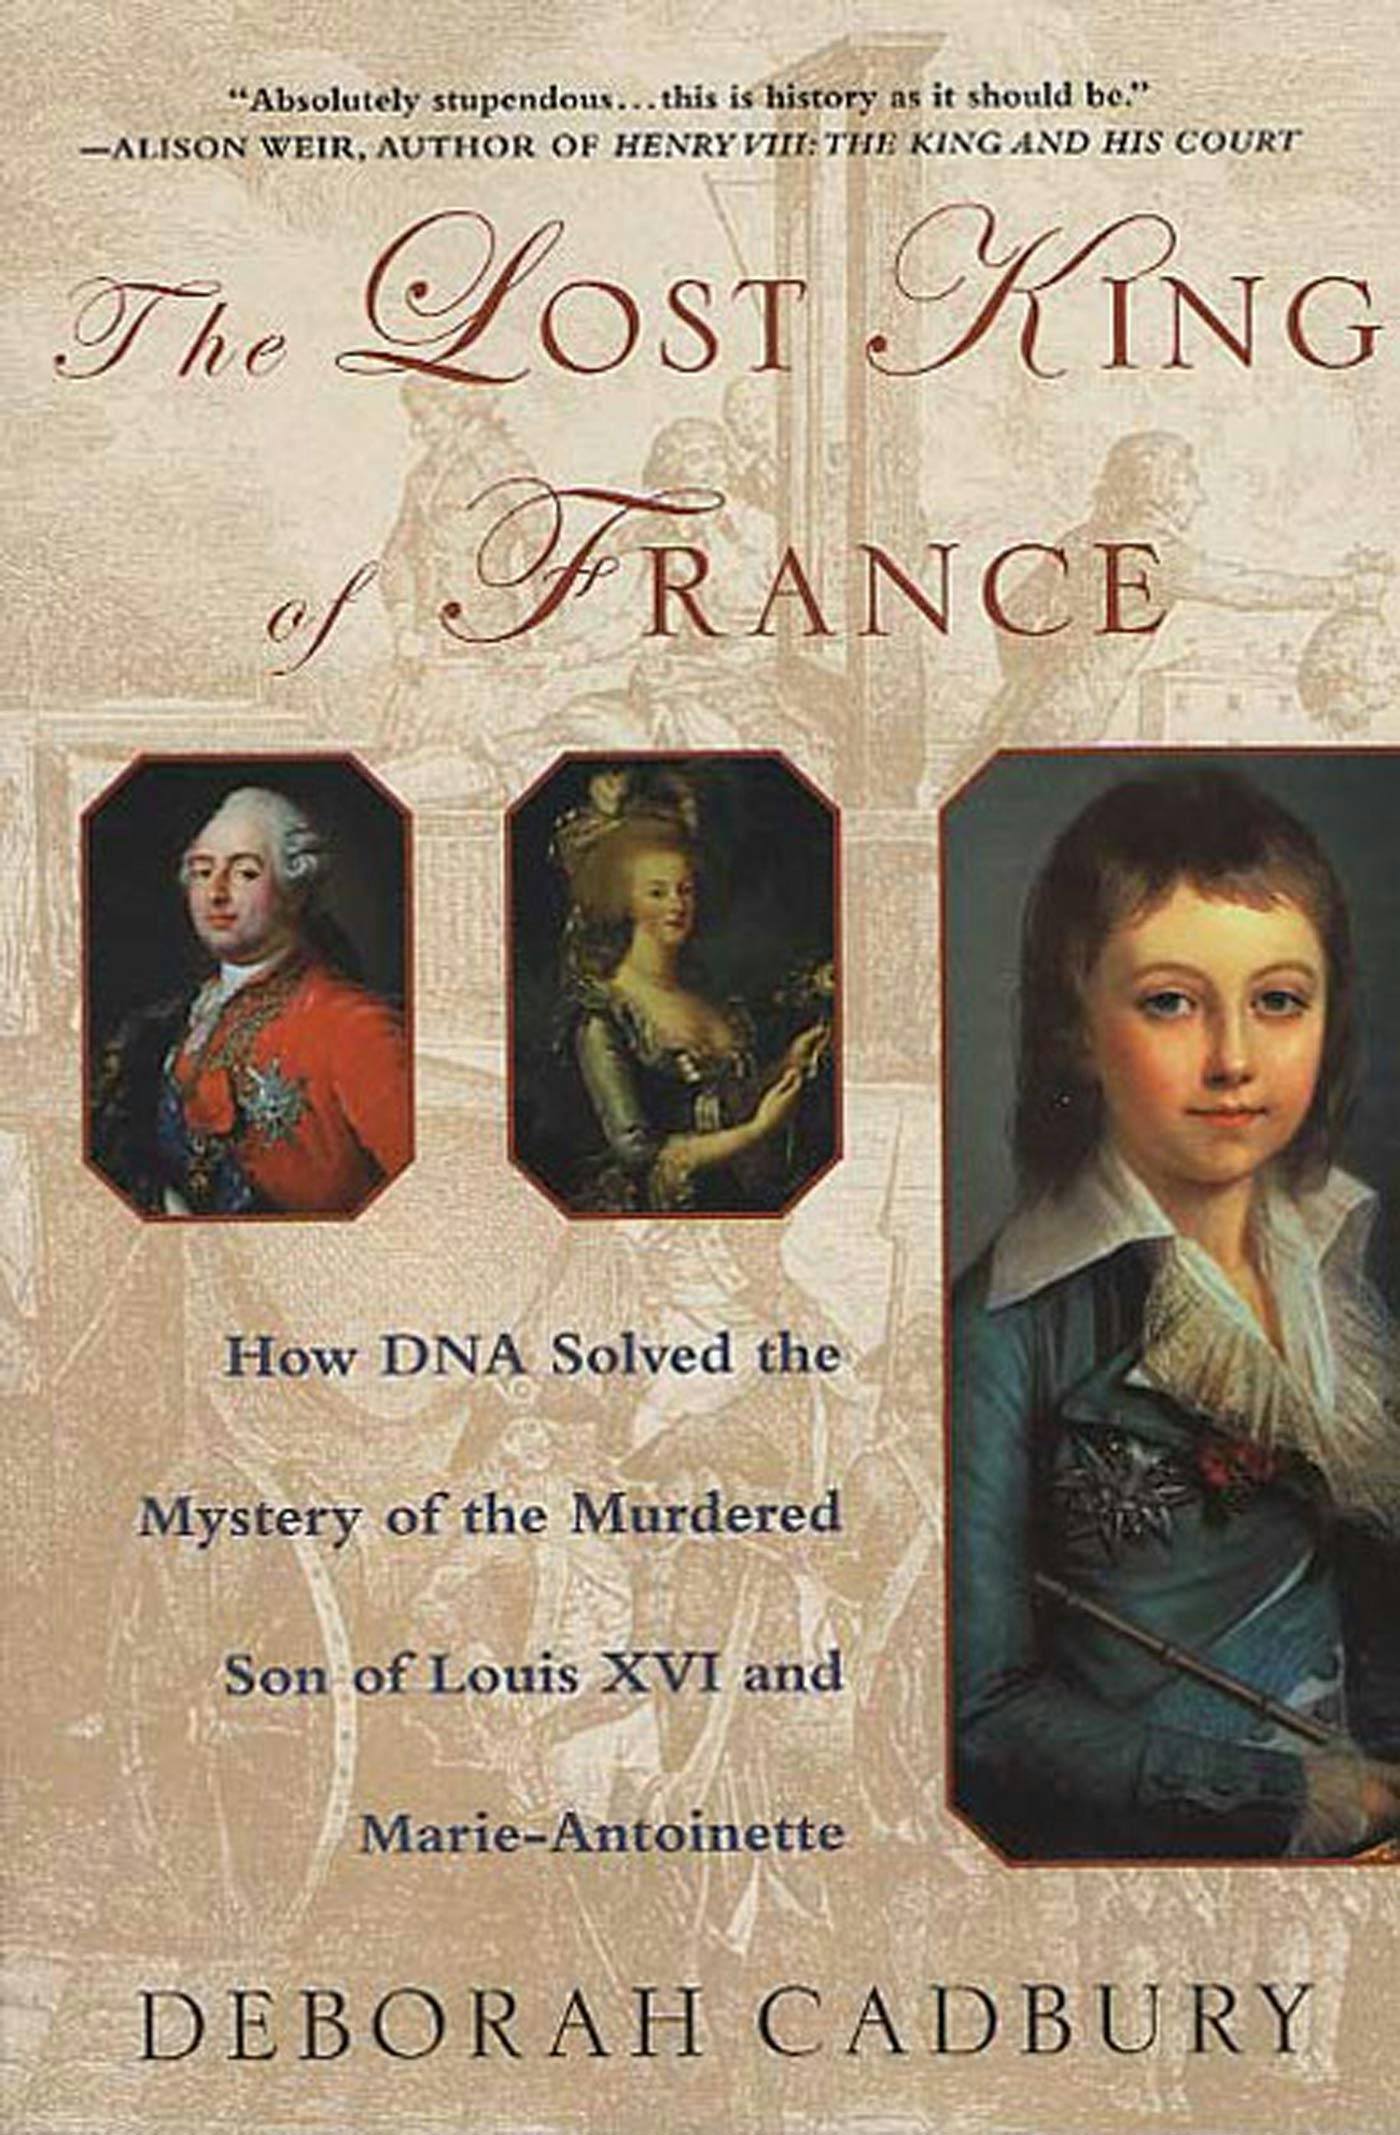 The Story of Louis XVII of France (Classic Reprint)